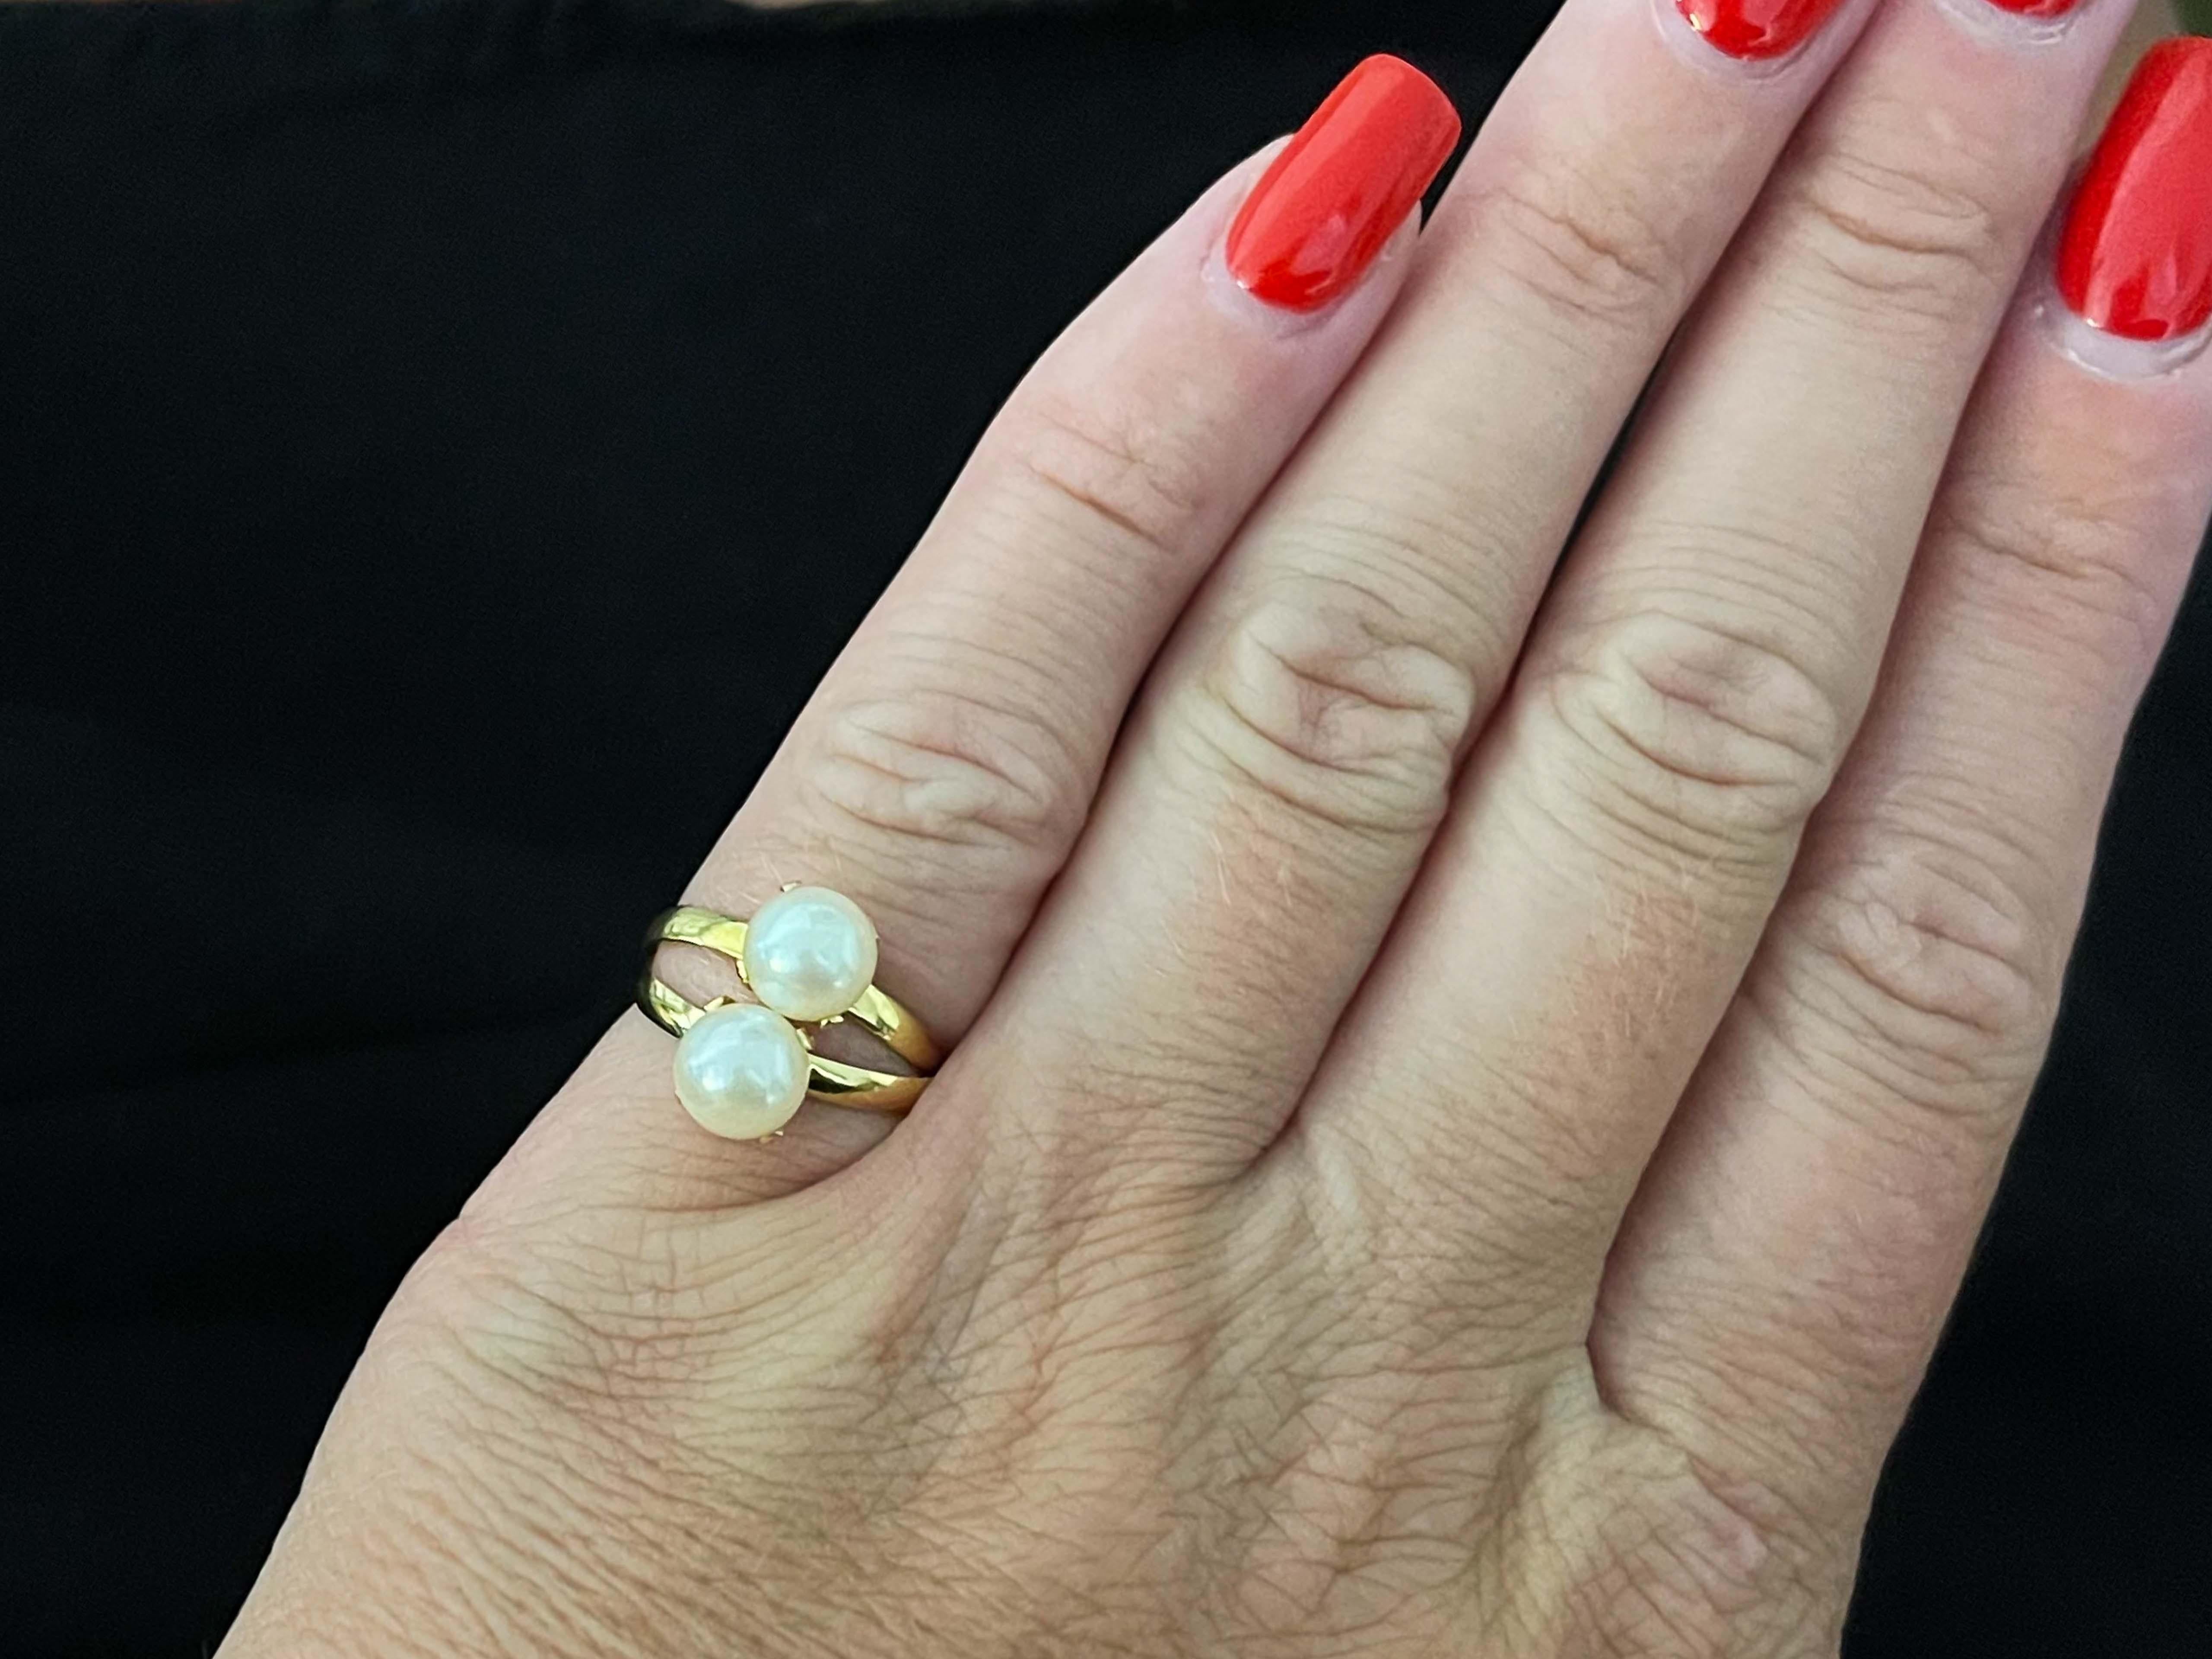 Item Specifications:

Metal: 18K Yellow Gold 

Total Weight: 2.8 Grams

Ring Size: 5.5 (resizable)

Gemstone Specifications:

Gemstone: 2 Akoya Pearls

Pearl Diameter: 6.7 mm

Condition: Preowned, Excellent

Stamped: 